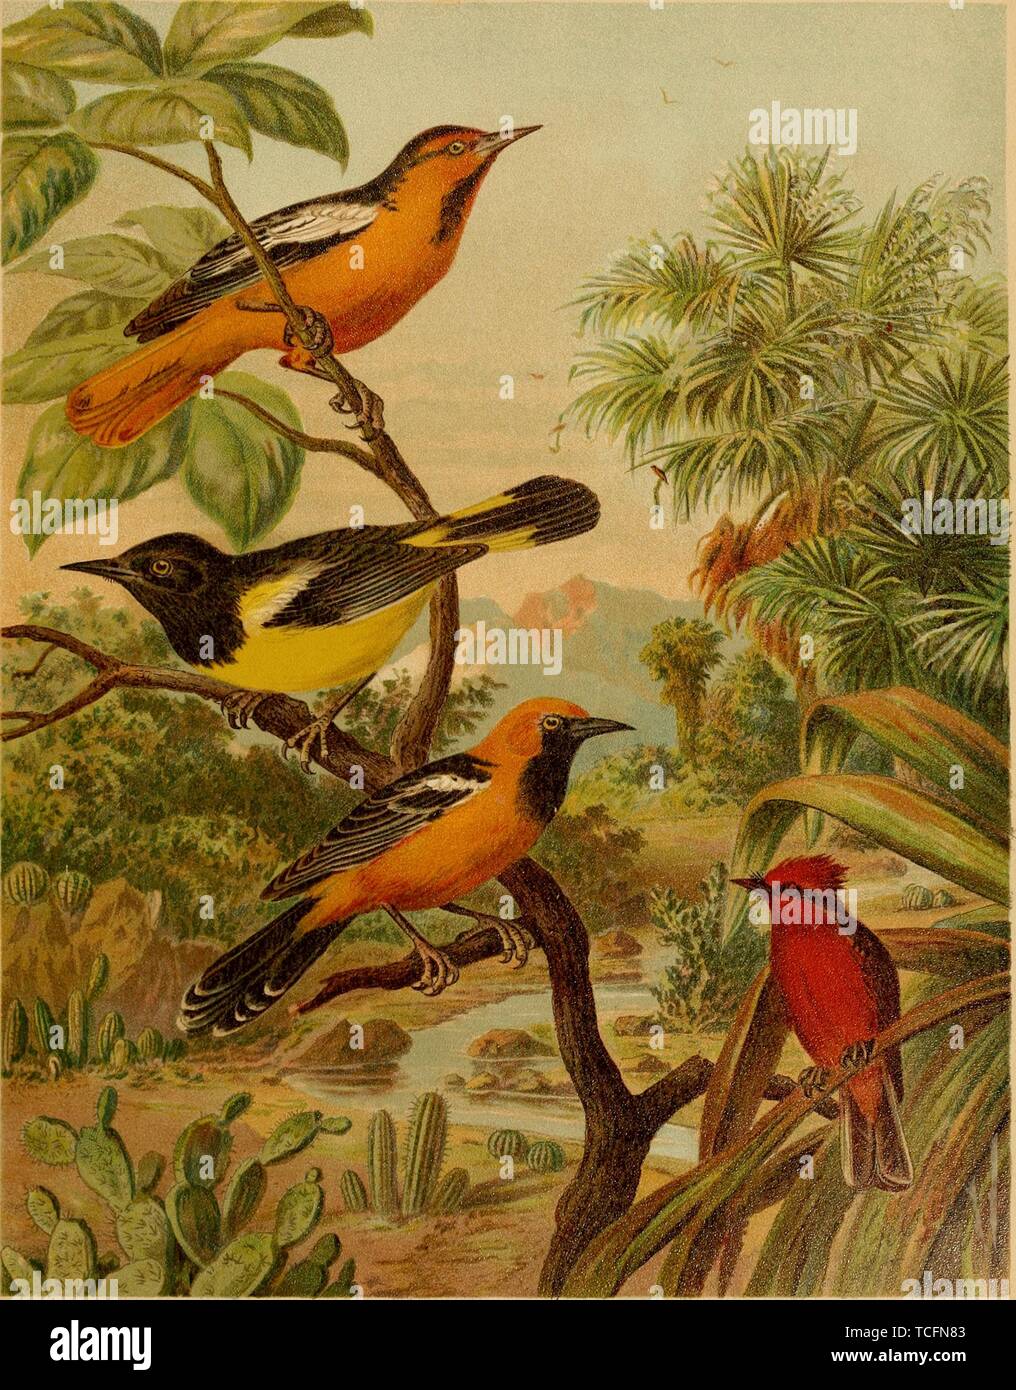 Engraved drawings of the Orioles, Bullock's Oriole (Icterus bullockii), Scott's Oriole (Icterus parisorum), Hooded Oriole (Icterus cucullatus), and Vermilion Flycatcher (Pyrocephalus obscurus), from the book 'Die Nordamerikanische Vogelwelt' by Henry Nehrling and Robert Ridgway, 1891. Courtesy Internet Archive. () Stock Photo